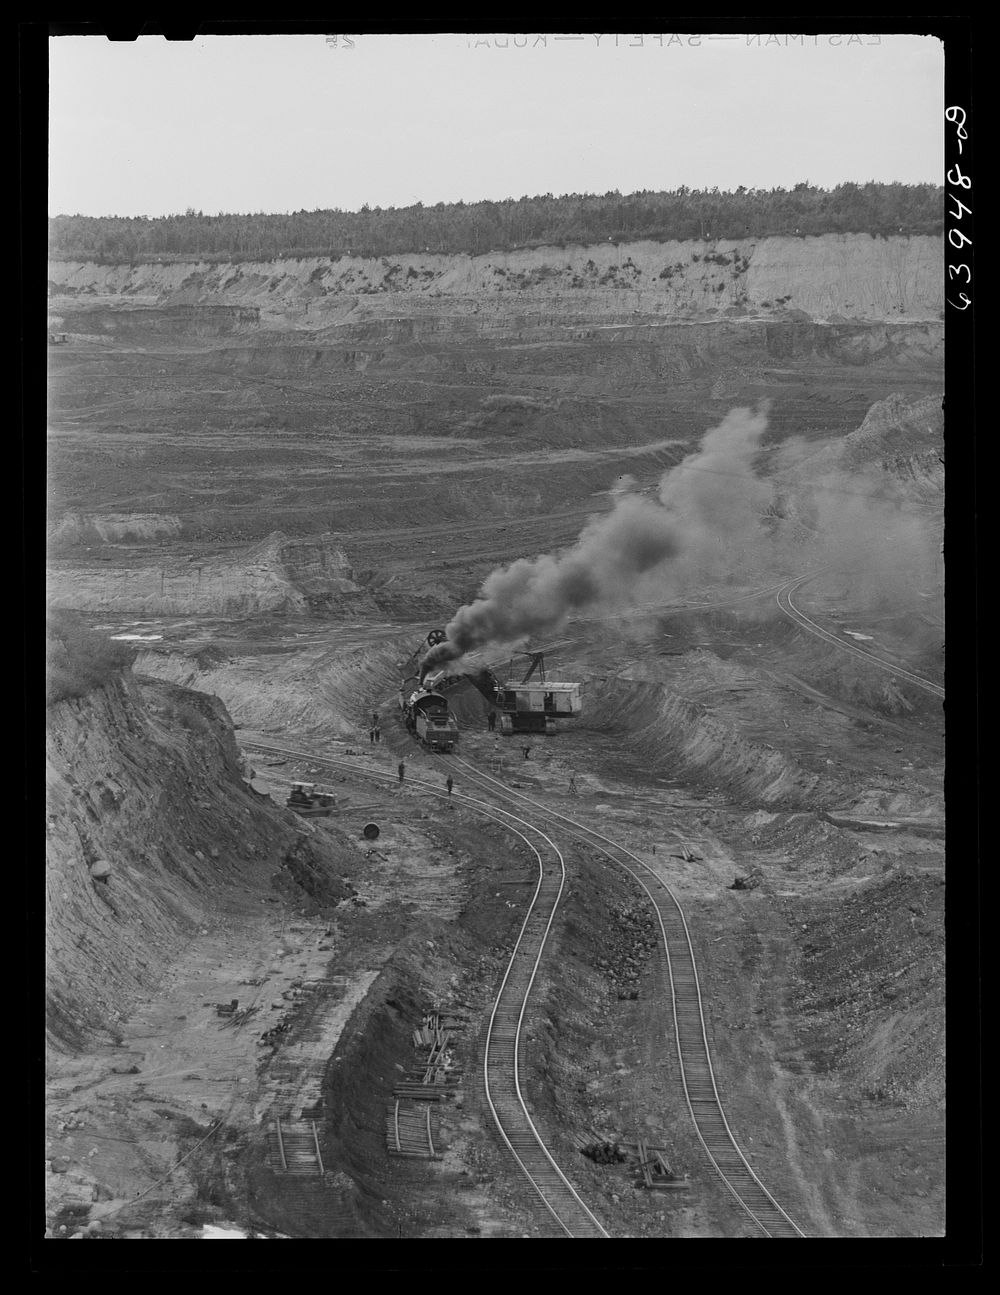 [Untitled photo, possibly related to: World's largest open pit iron mine, Hull-Rust-Mahoning, near Hibbing, Minnesota].…